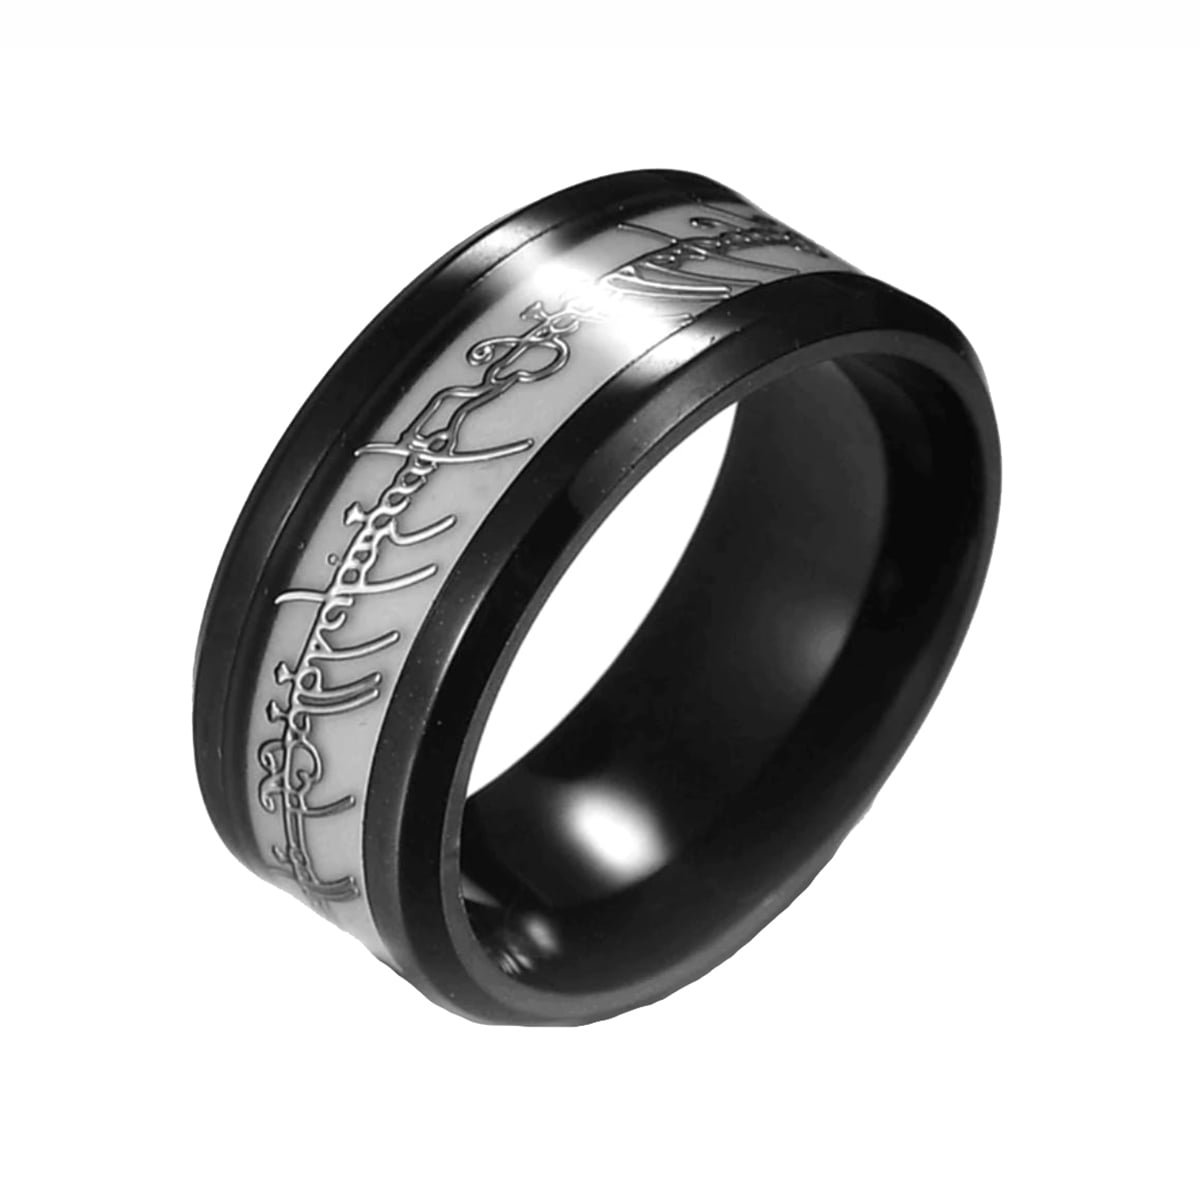 Ginger Lyne Collection Black and Stainless Steel 8mm Comfort Fit Wedding Band Ring